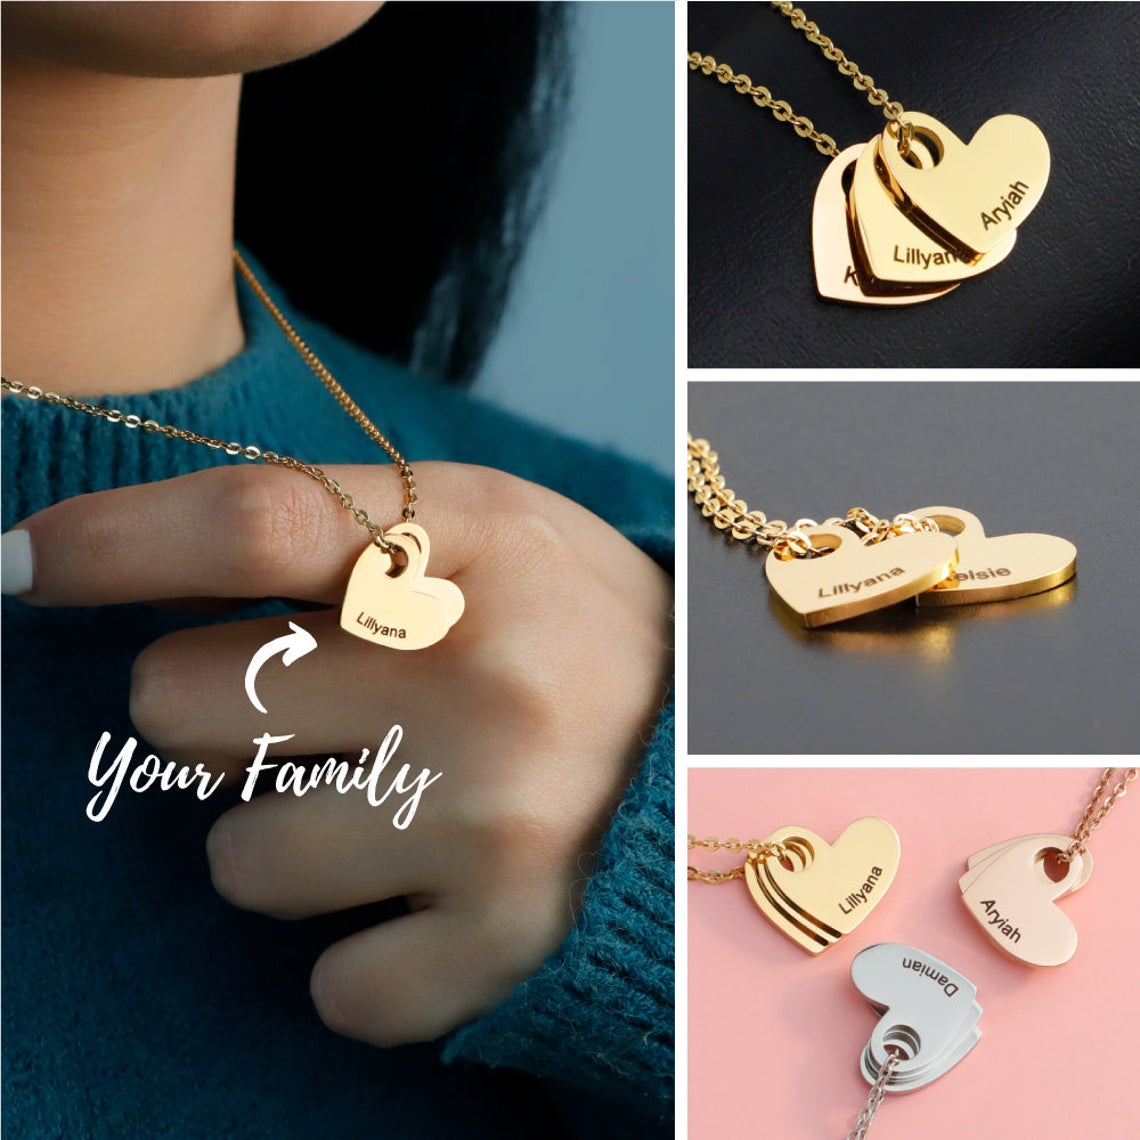 “Be You” Personalized Family Name Necklace